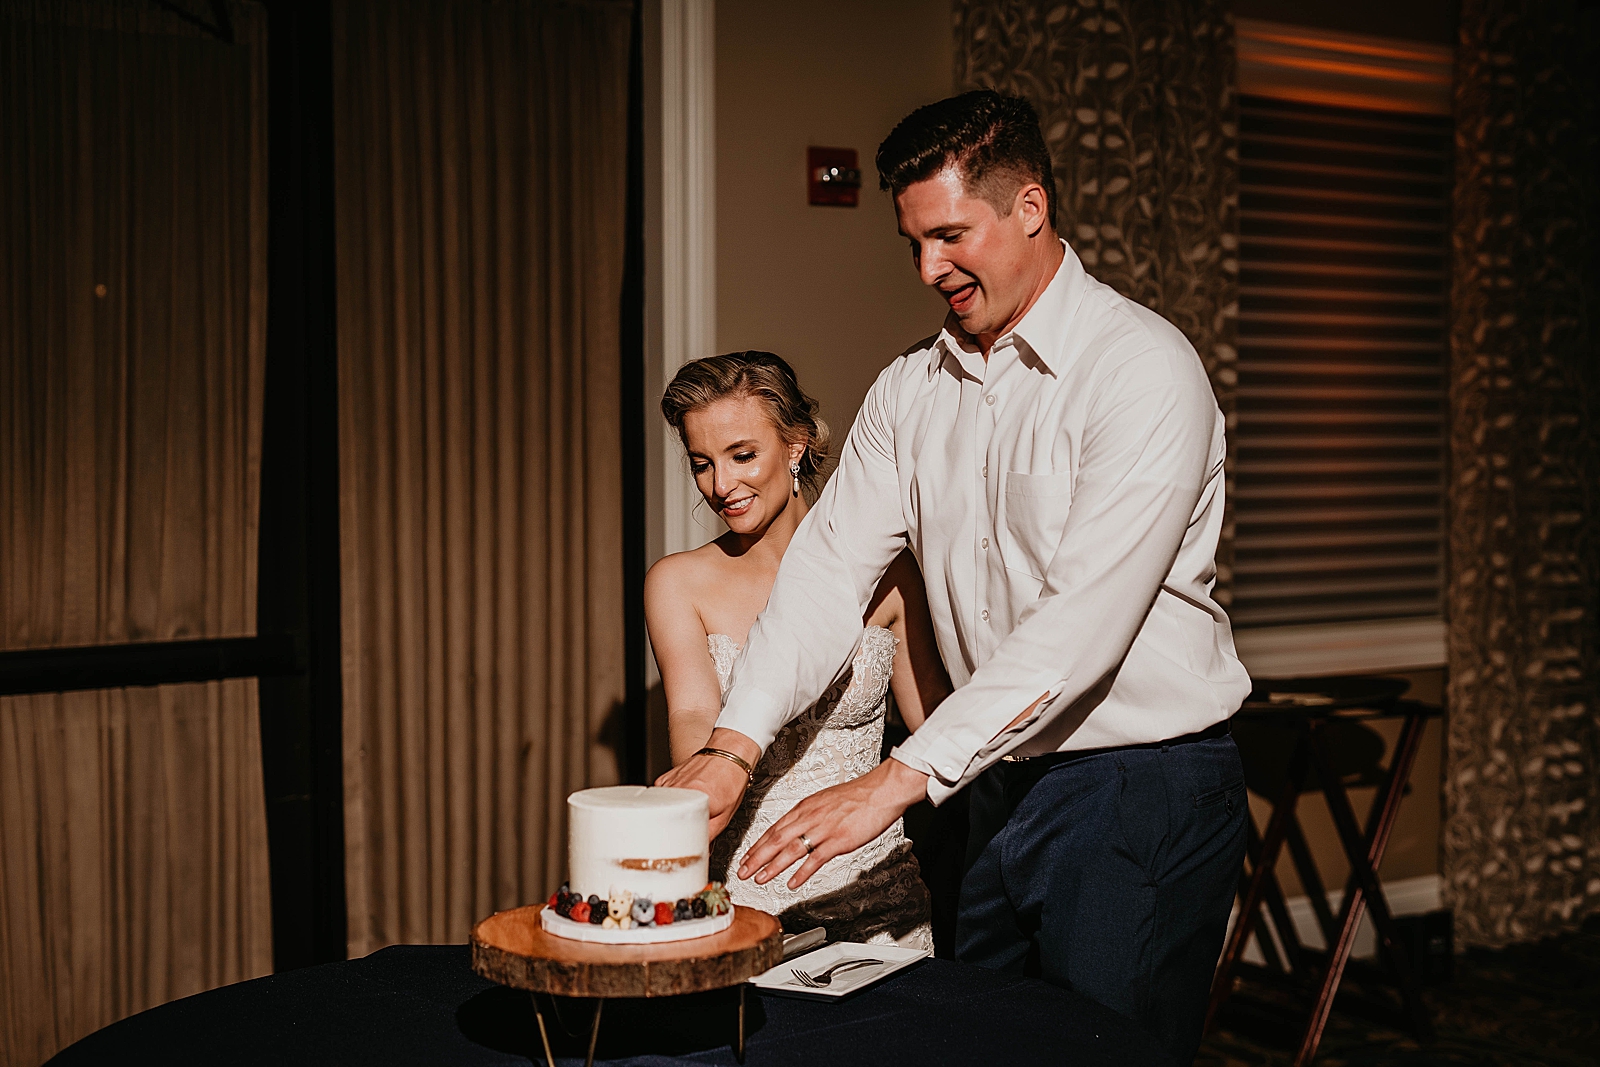 Bride and Groom cutting Wedding cake together